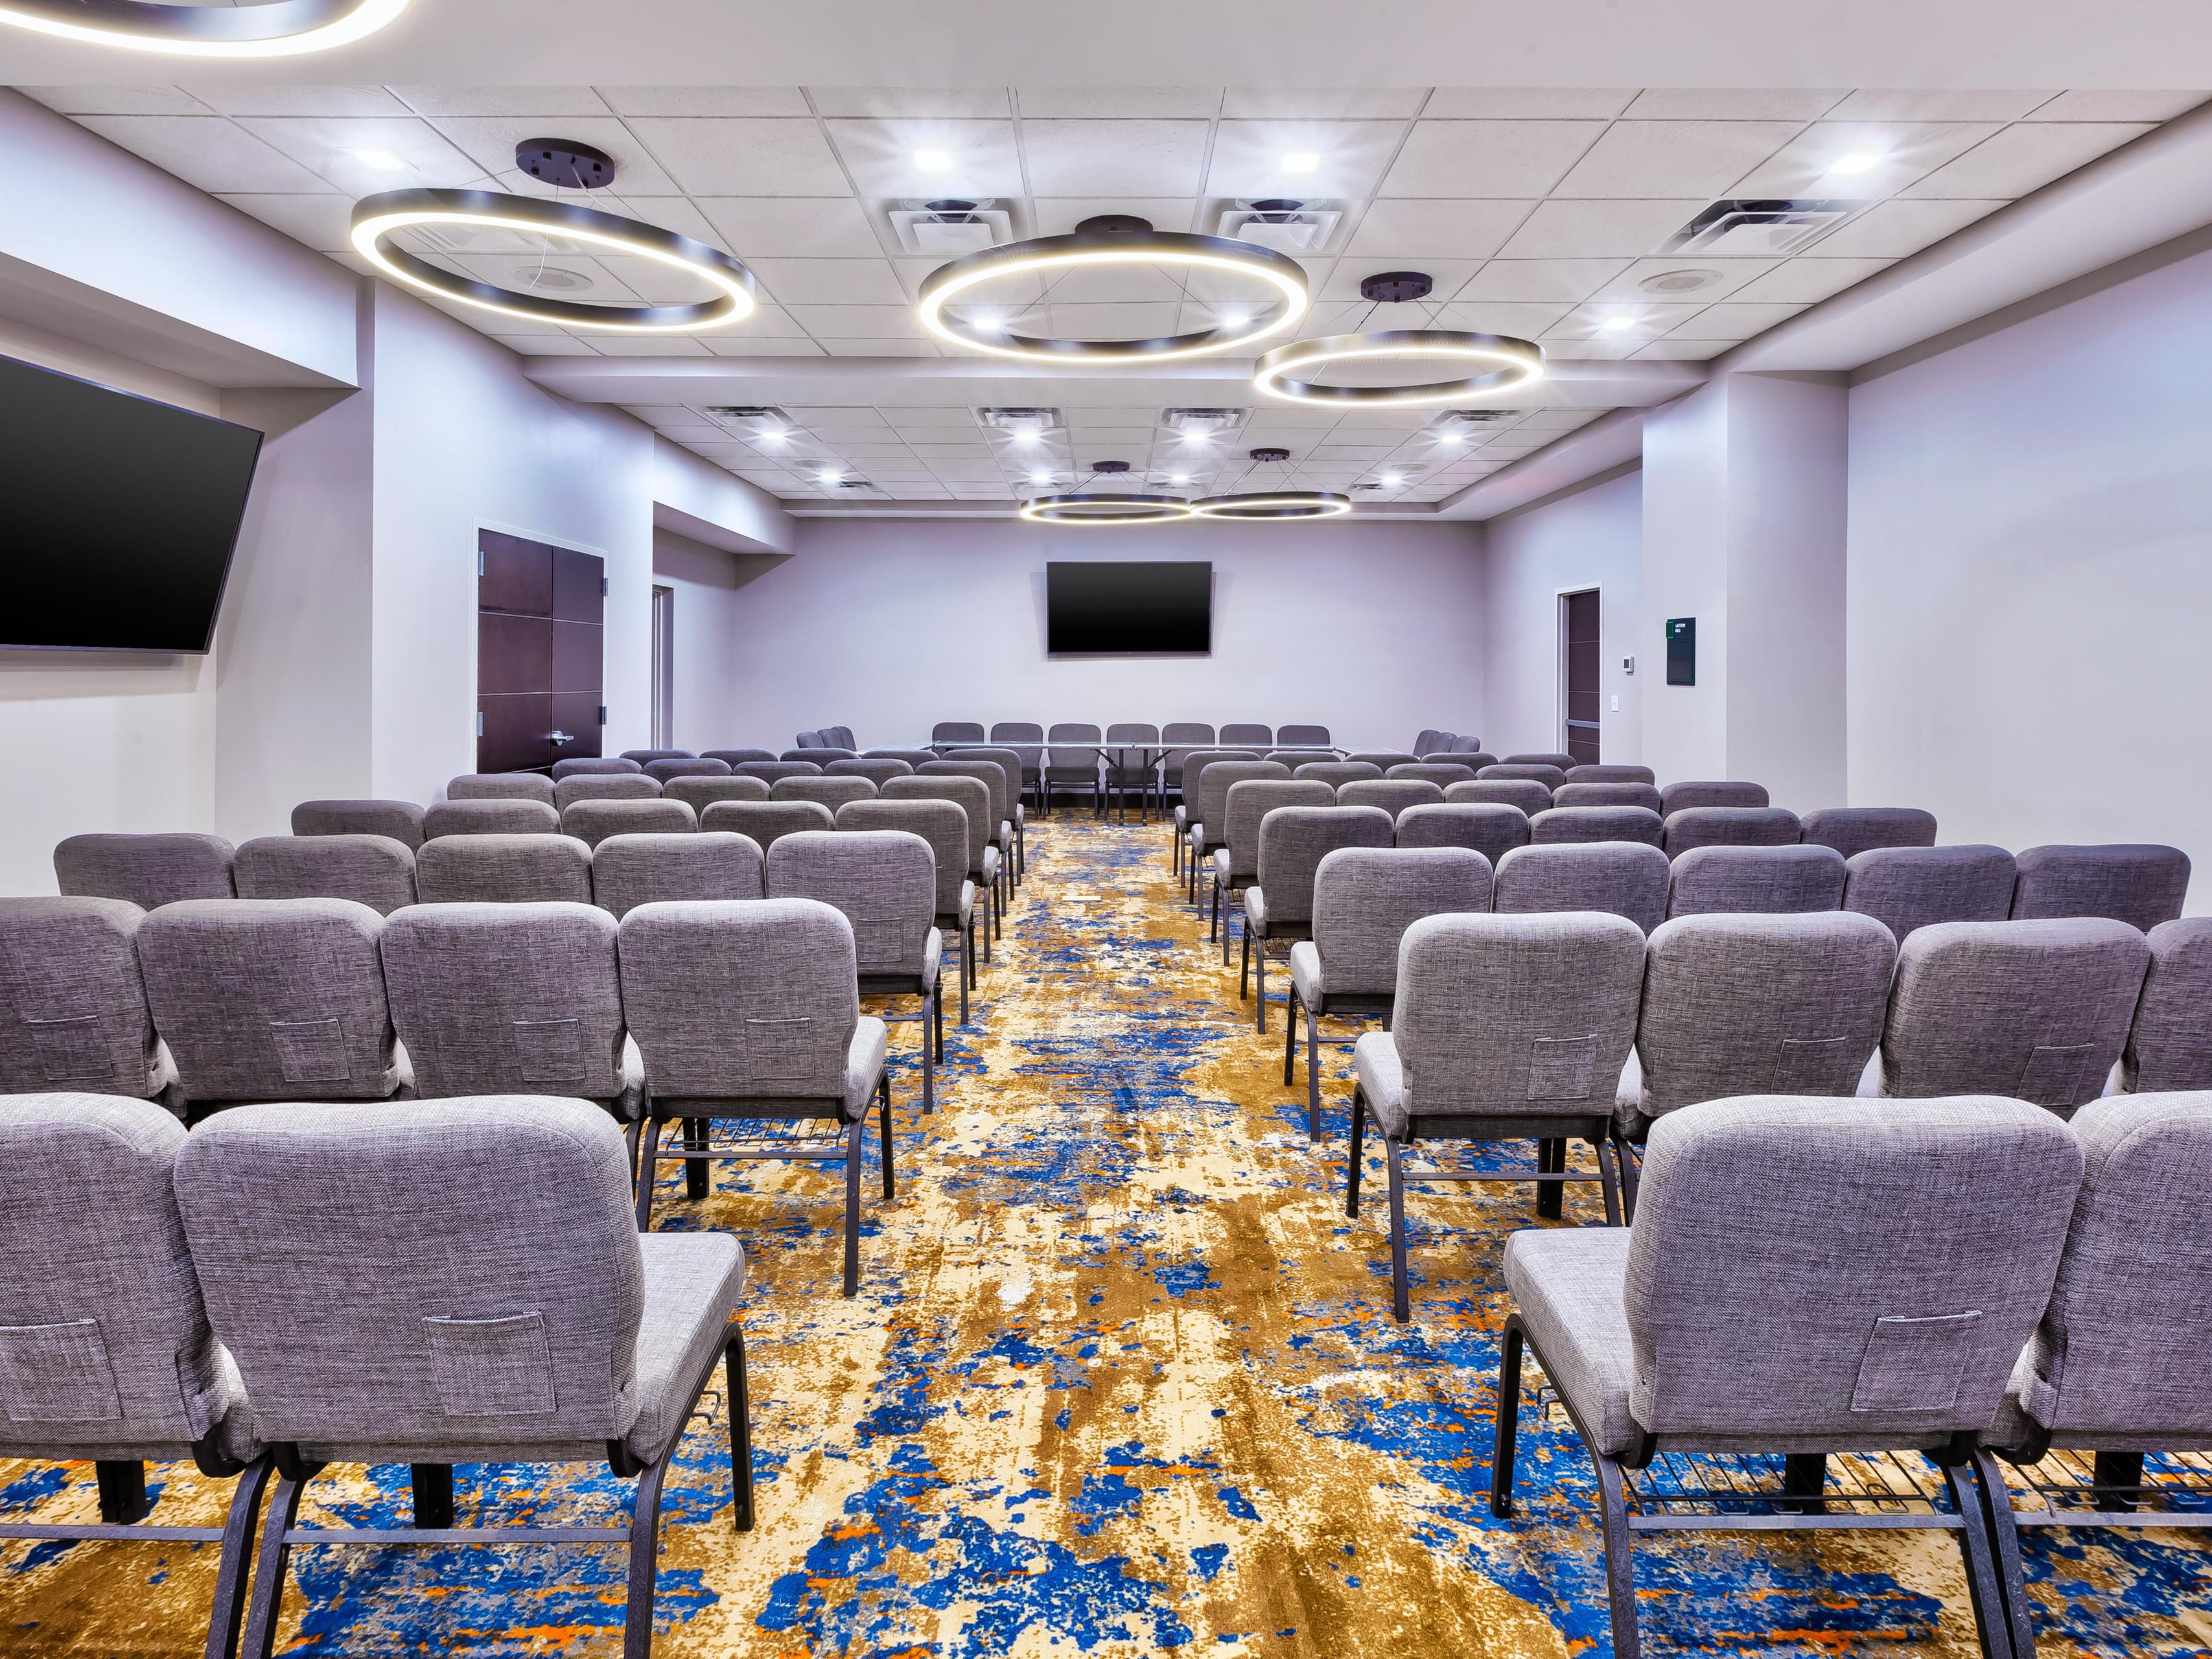 Our brand new property comes equipped with a spacious conference center! Don't think twice when seeking a space for your business event or personal gathering!